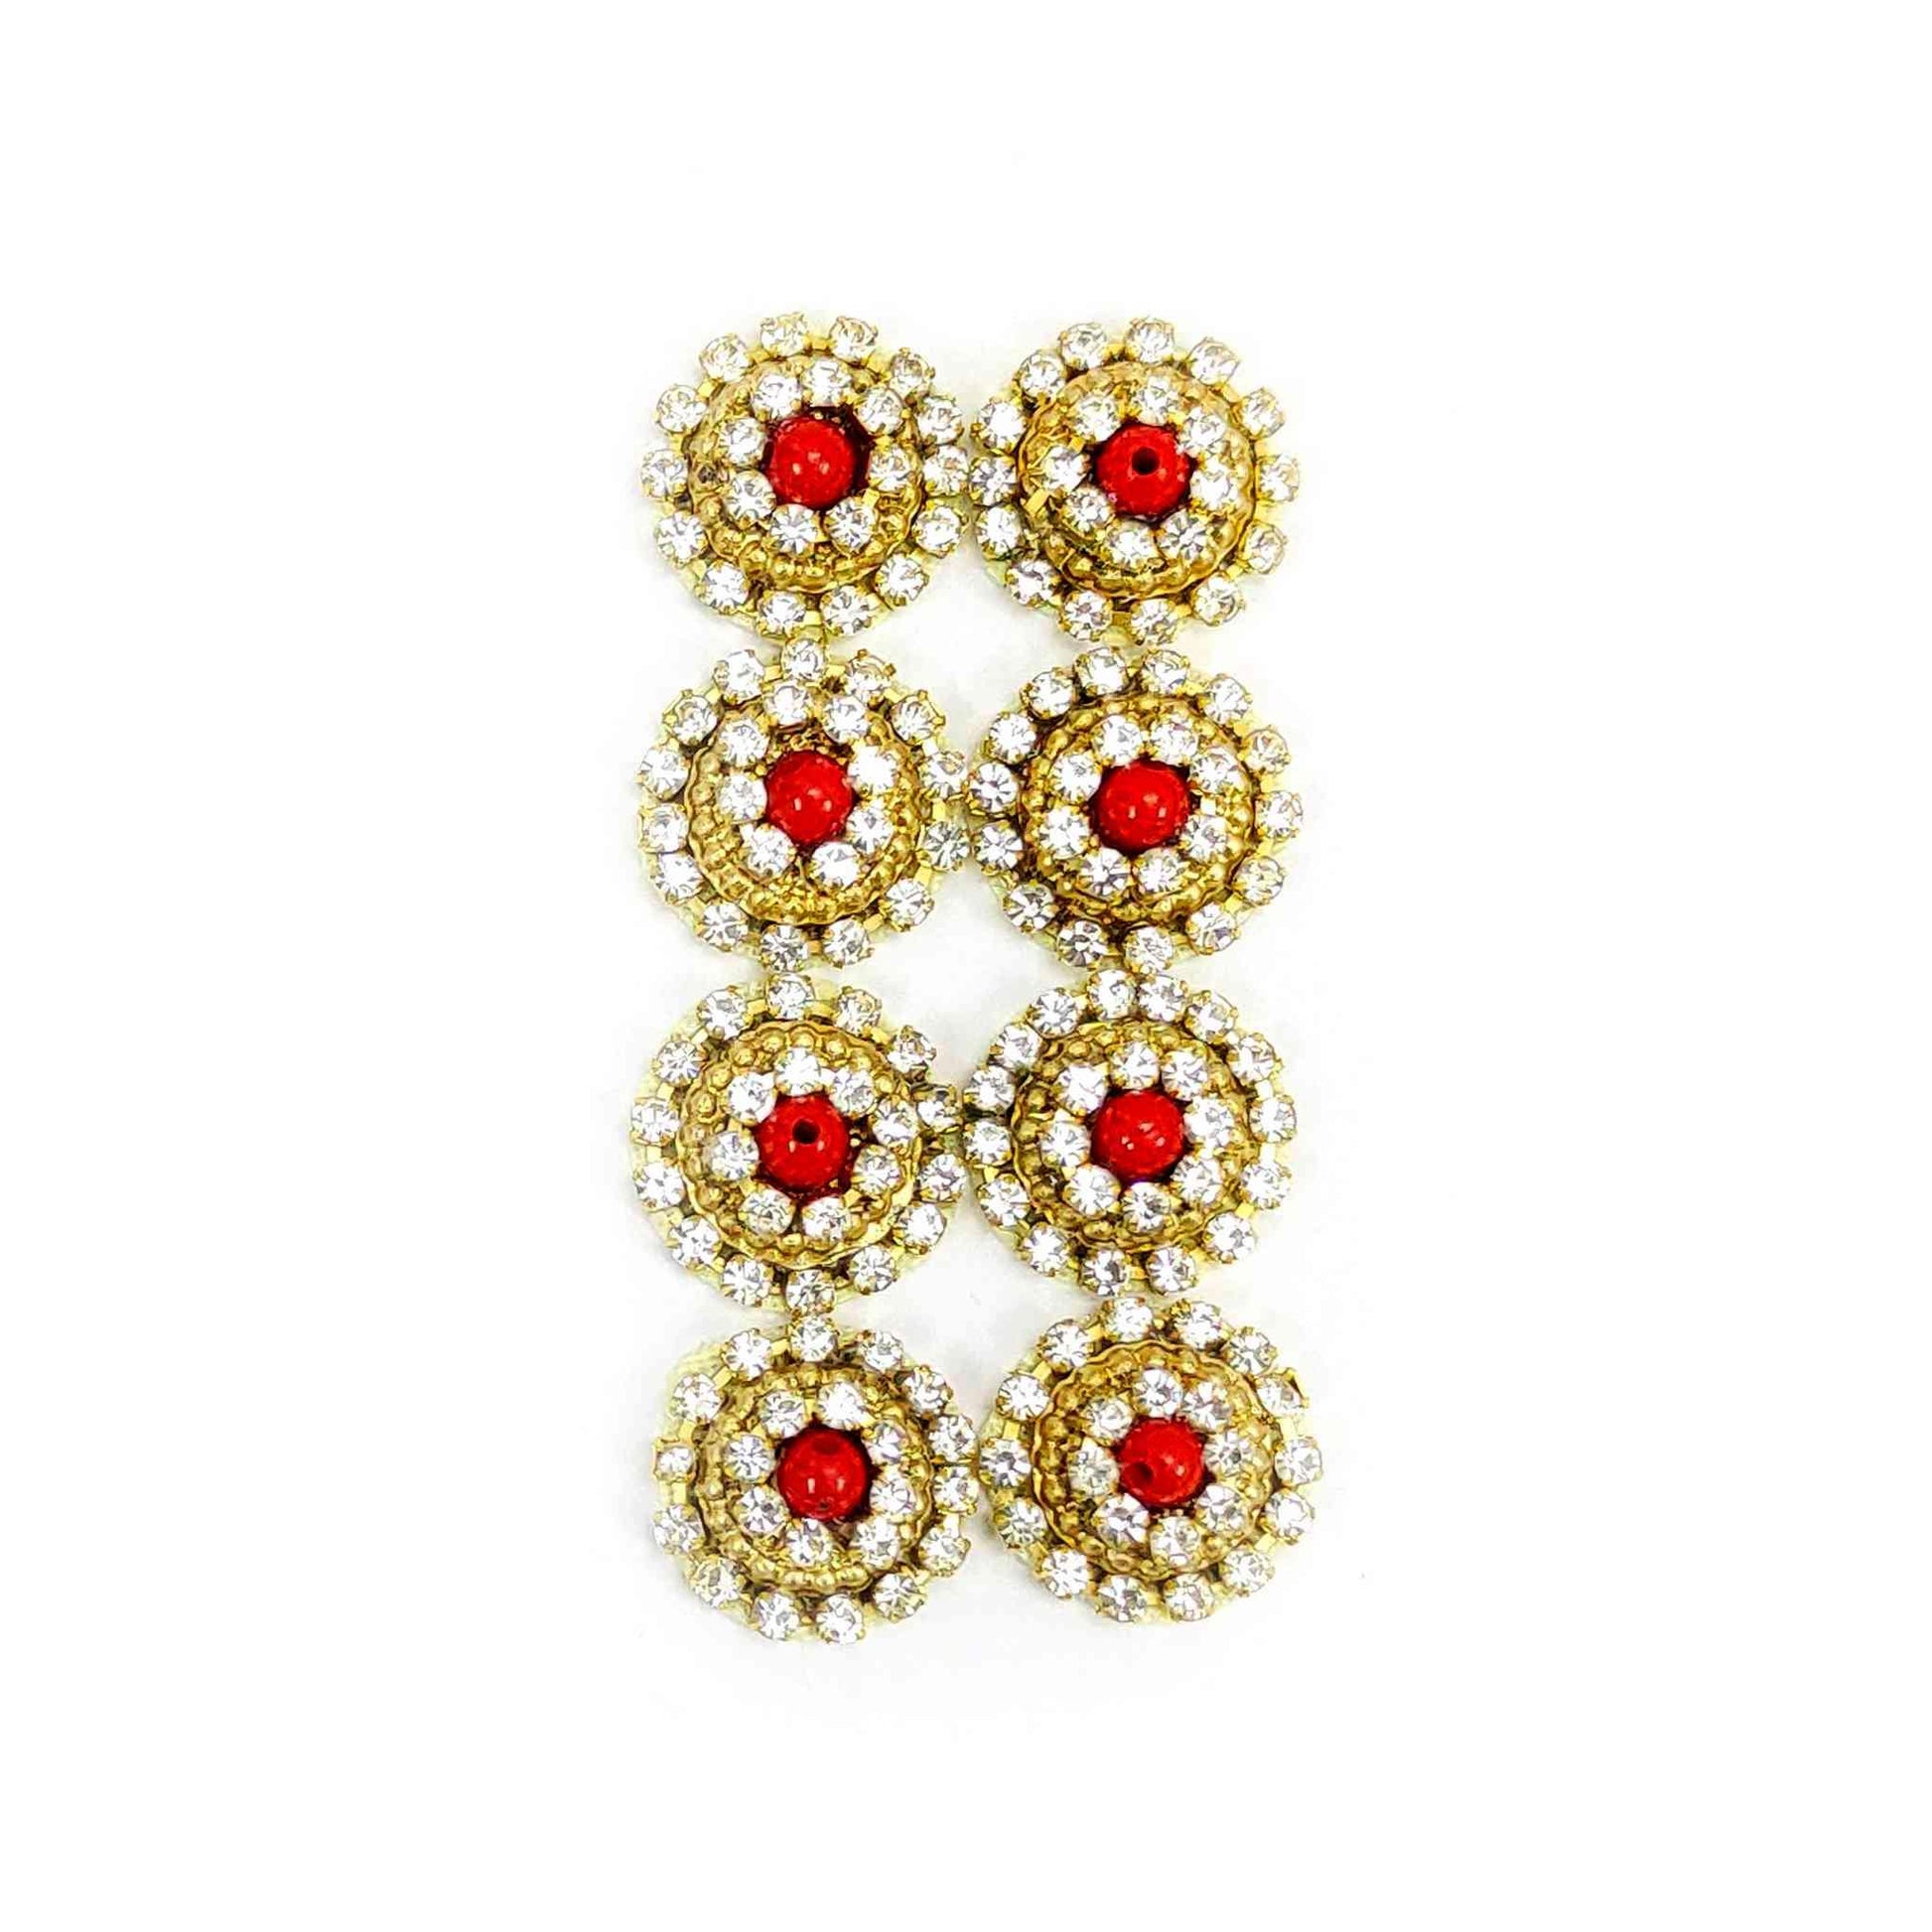 Rhinestone Studded Buti for DIY Craft, Trousseau Packing or Decoration (Bunch of 12) - Design 220, Red - Indian Petals